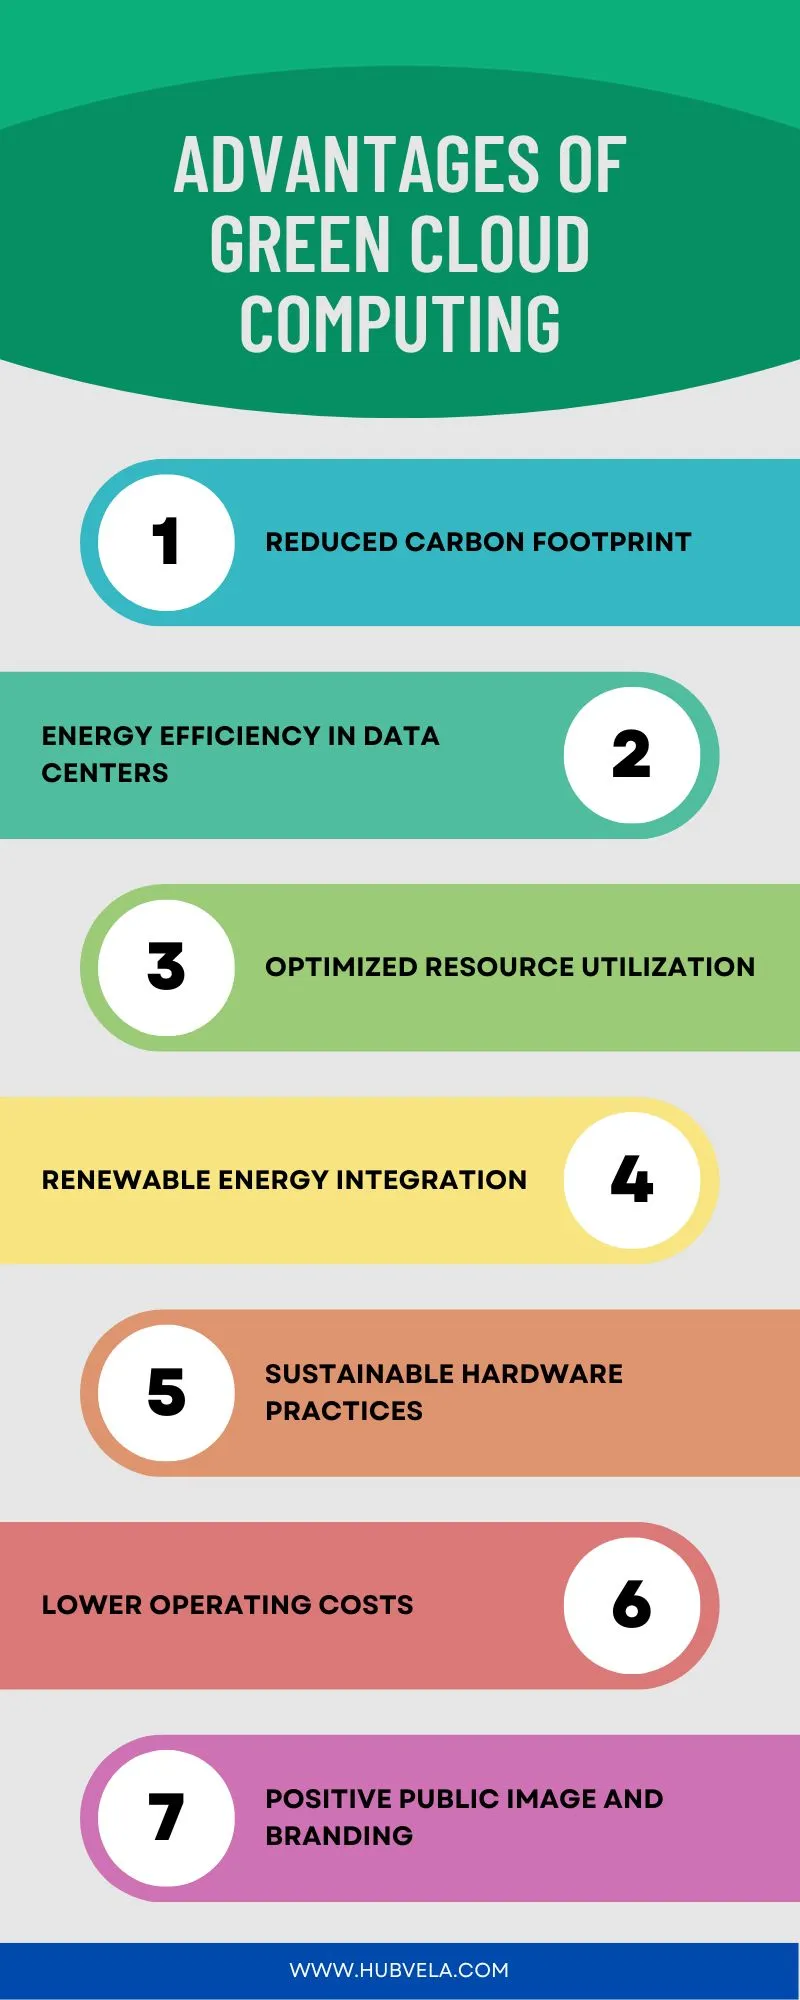 Advantages of Green Cloud Computing Infographic